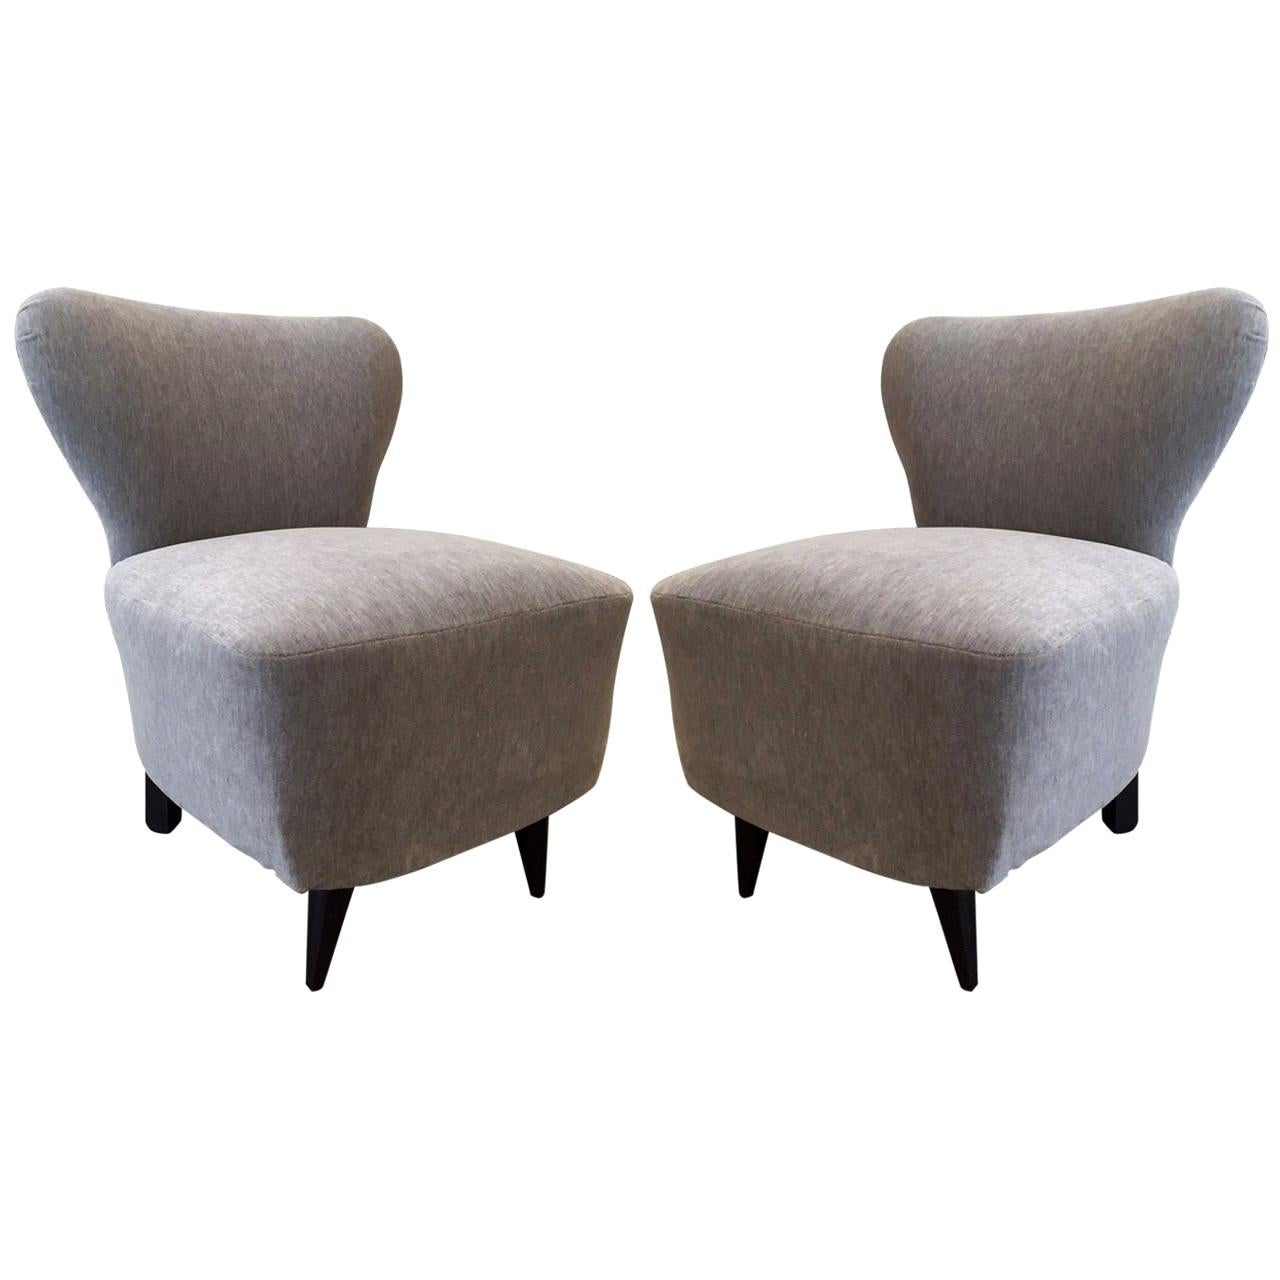 Pair of 1930s French Slipper Chairs Style of Jacques Adnet